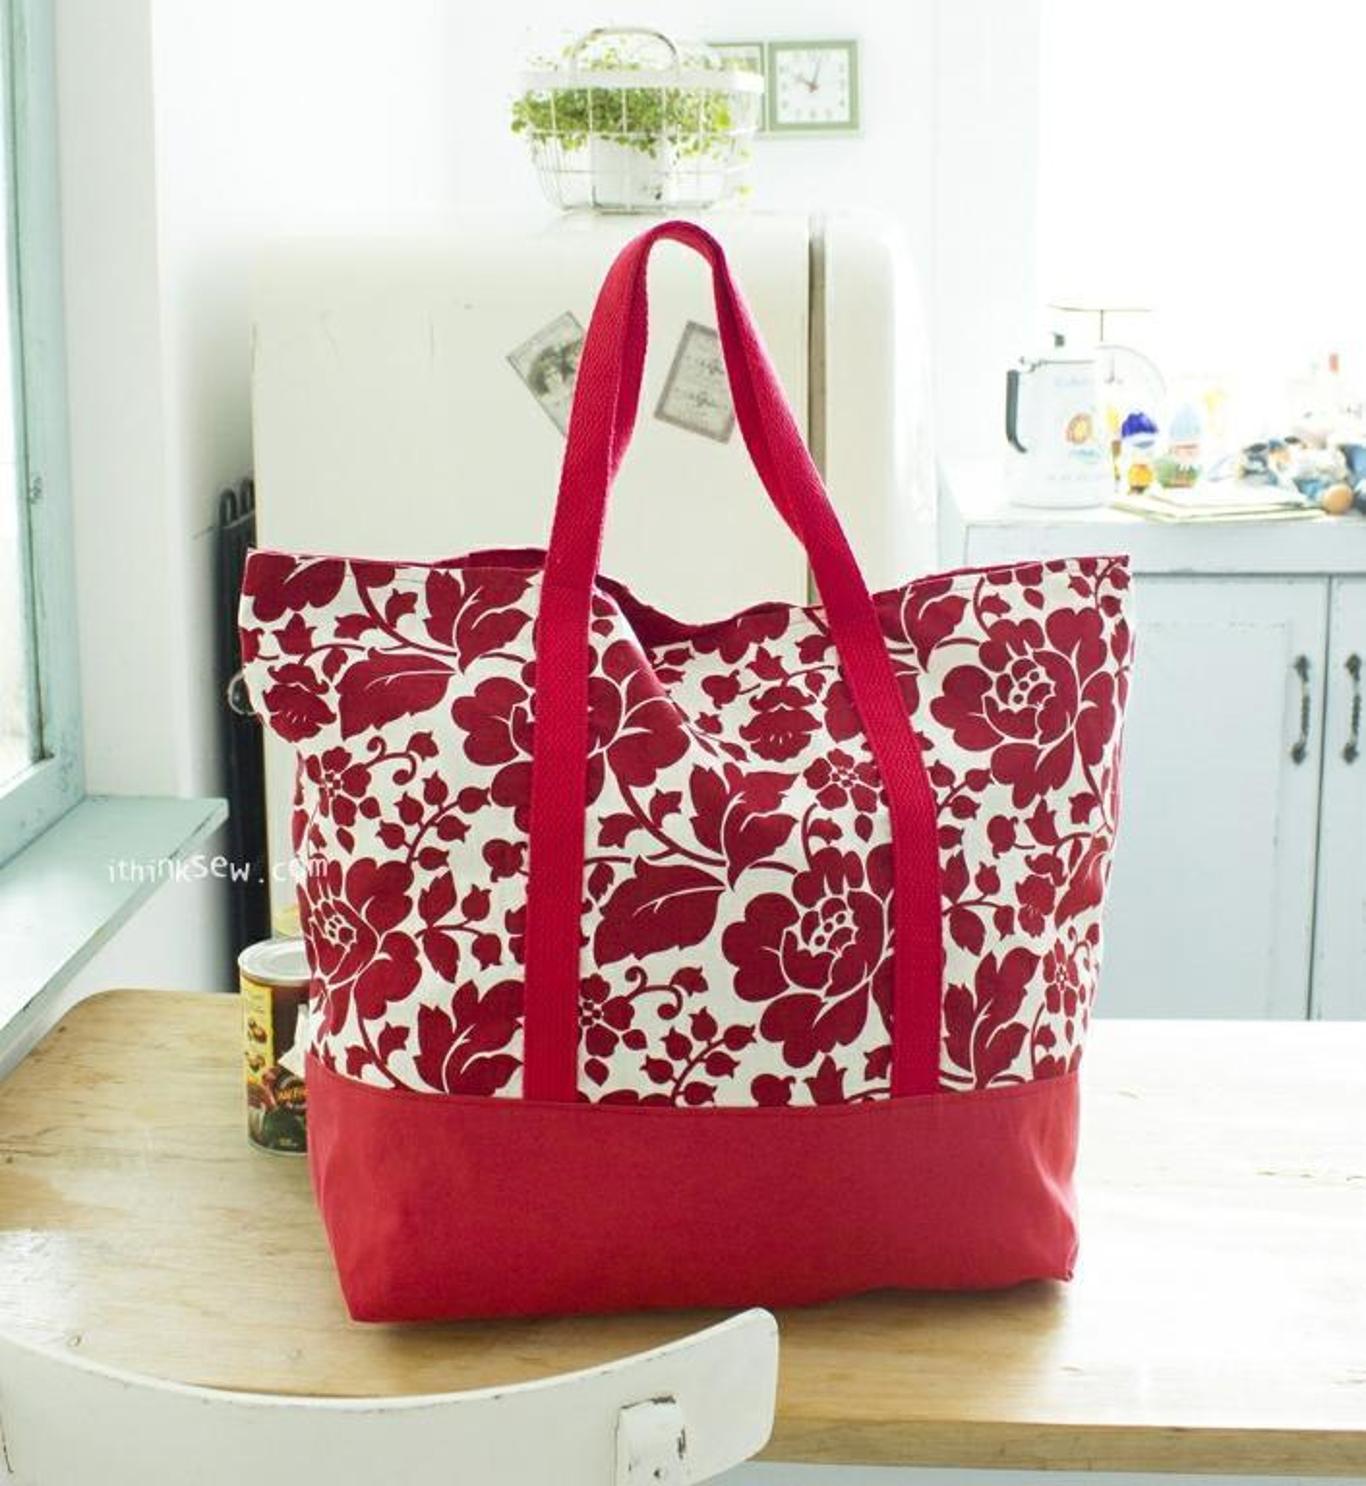 FREE PATTERN ALERT 20 Handbags and purses - On the Cutting Floor